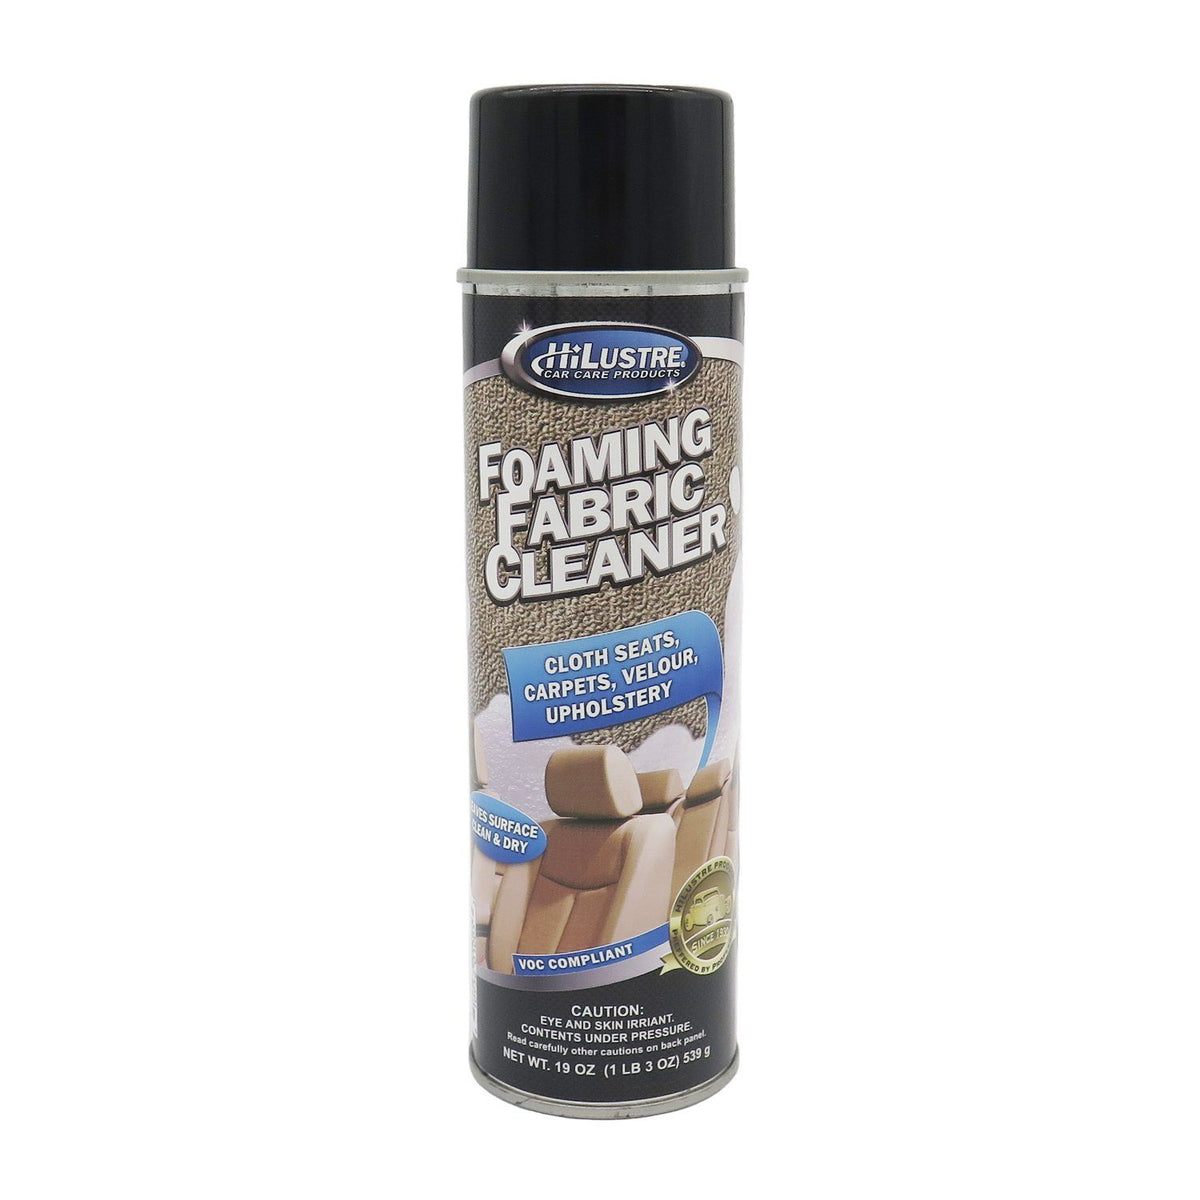  Couch Fabric Cleaner, Upholstery Cleaner, Foam